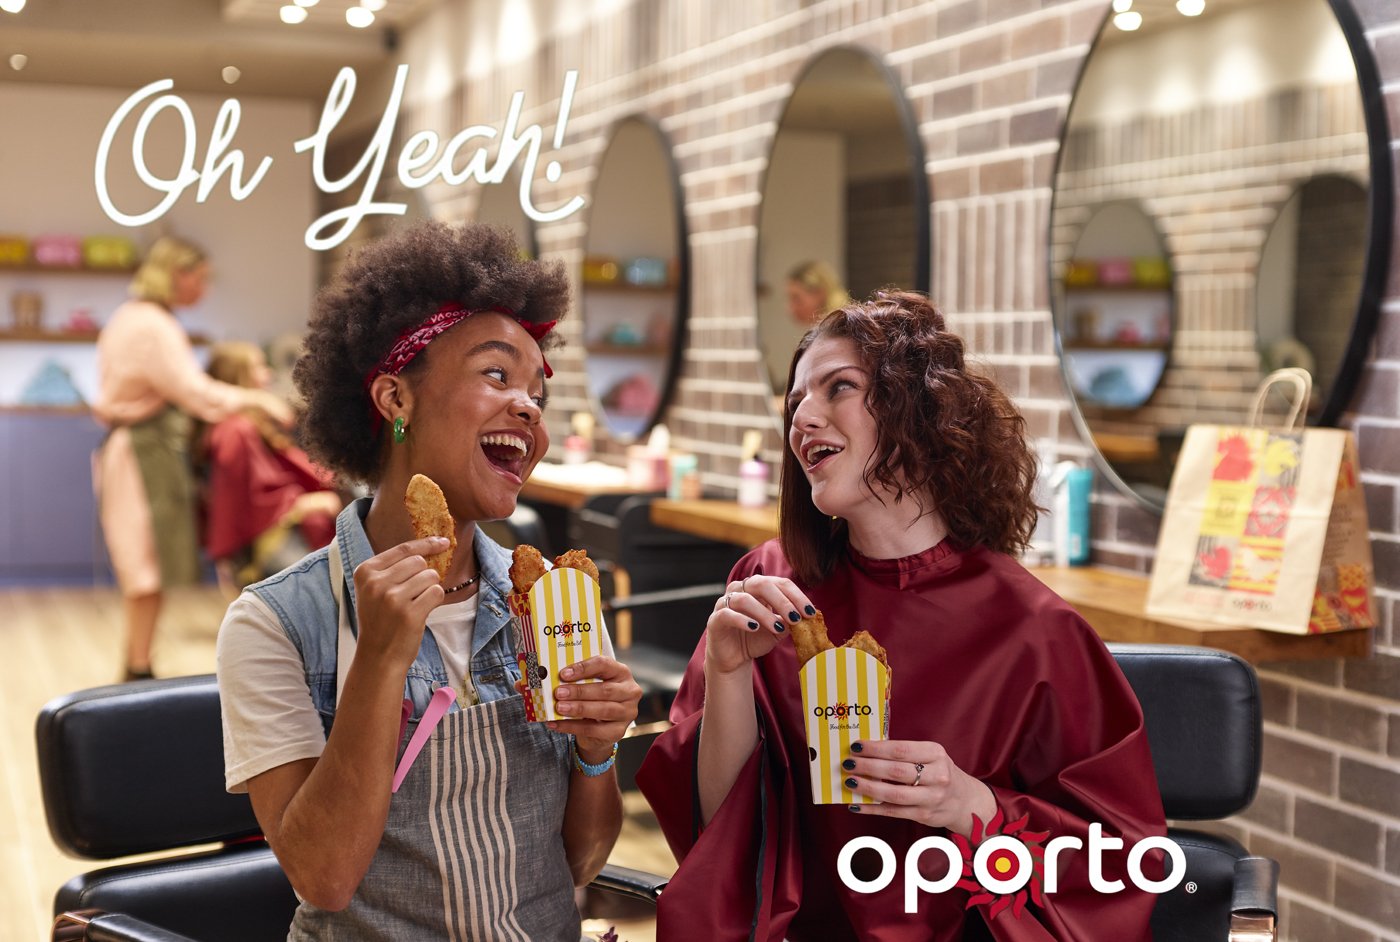 Oporto "oh yeah" campaign